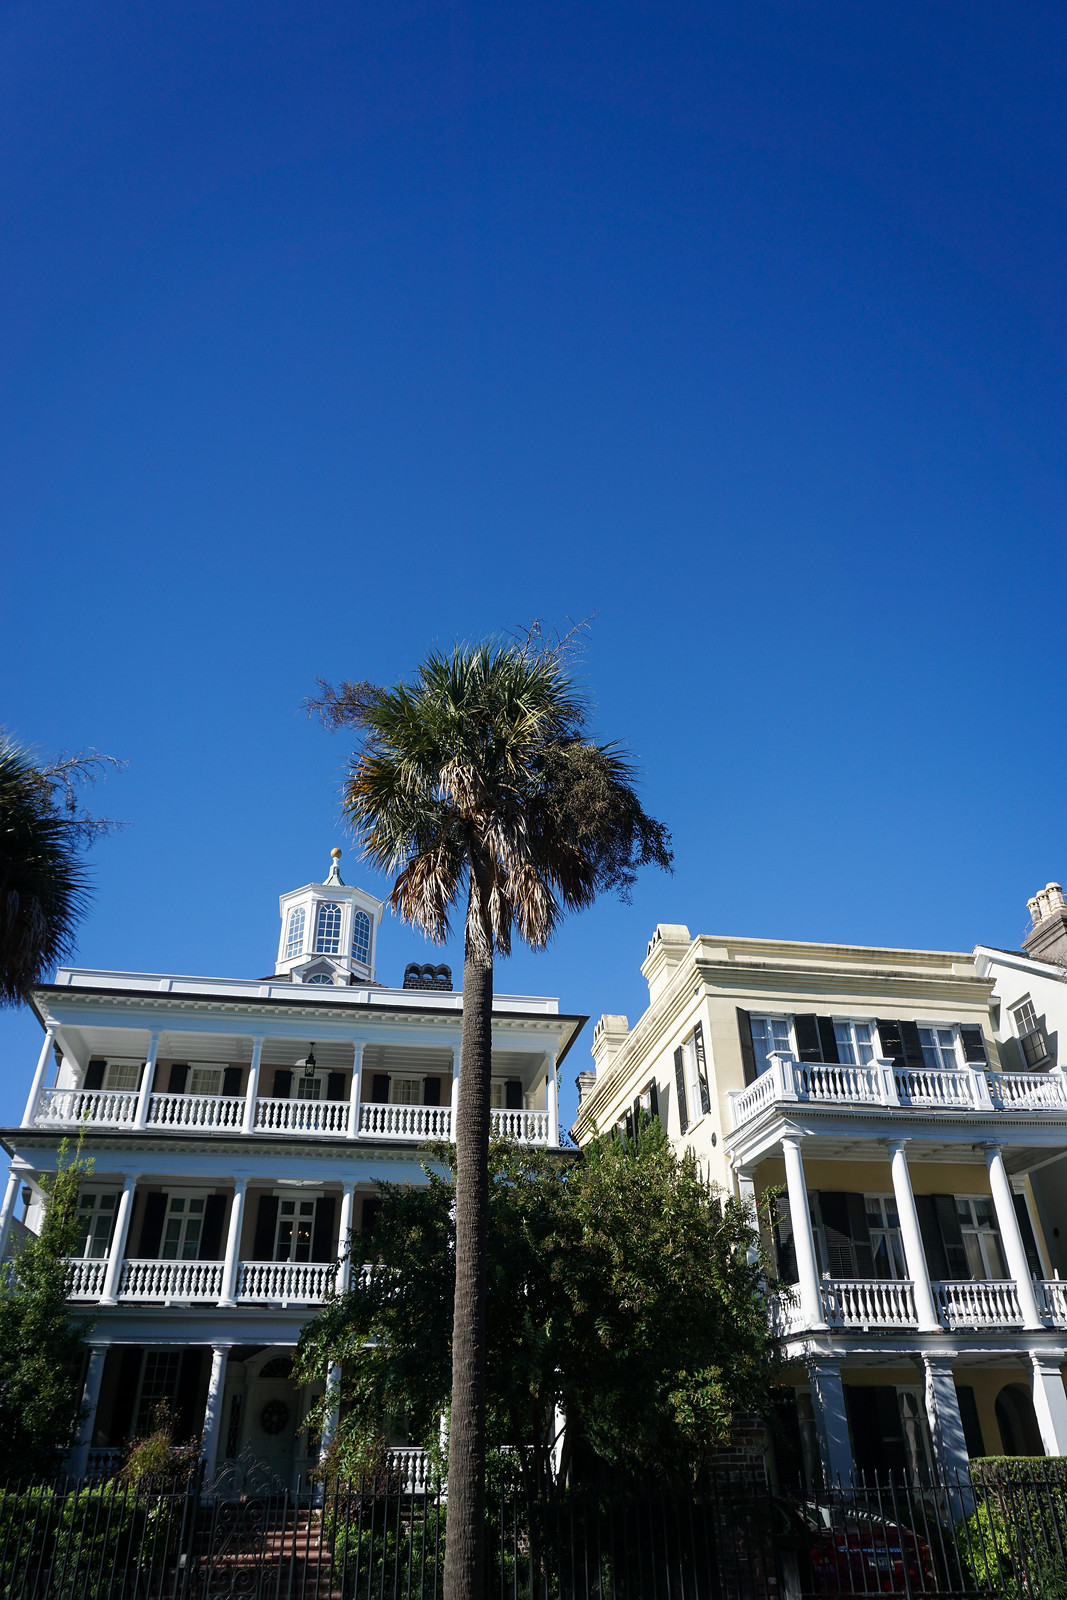 10 Things You Must Do in Charleston | The Battery | Two Sisters Walking Tour | Best Tours in Charleston | What to Do in Charleston South Carolina | Charleston Travel Guide | Top Things to do in Charleston | Best Things to Do in Charleston SC | What to See, Do & Eat in Charleston